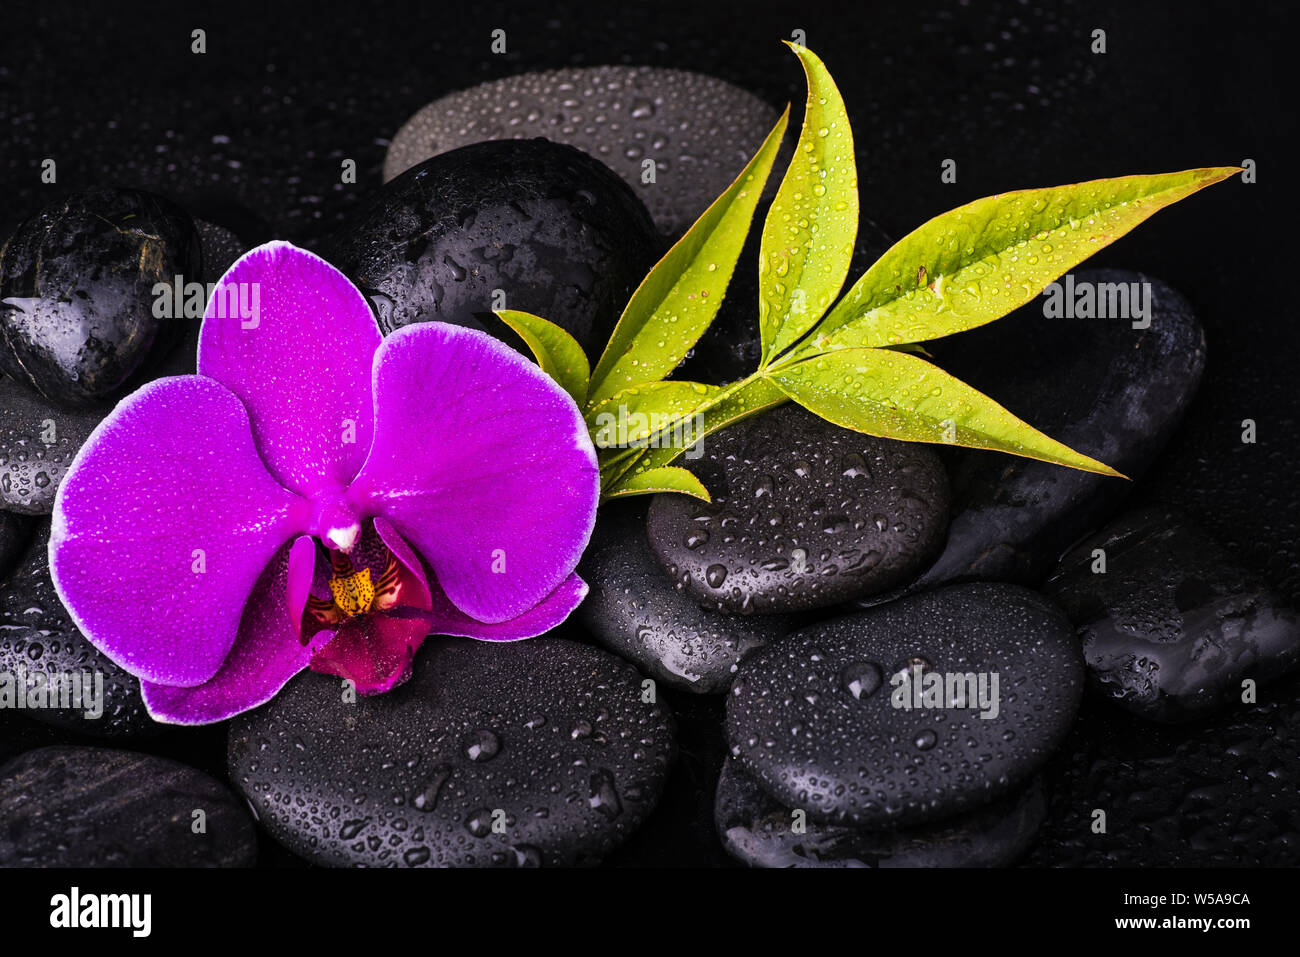 spa.Group of black stones with a purple orchid flower and foliage on a dark background Stock Photo